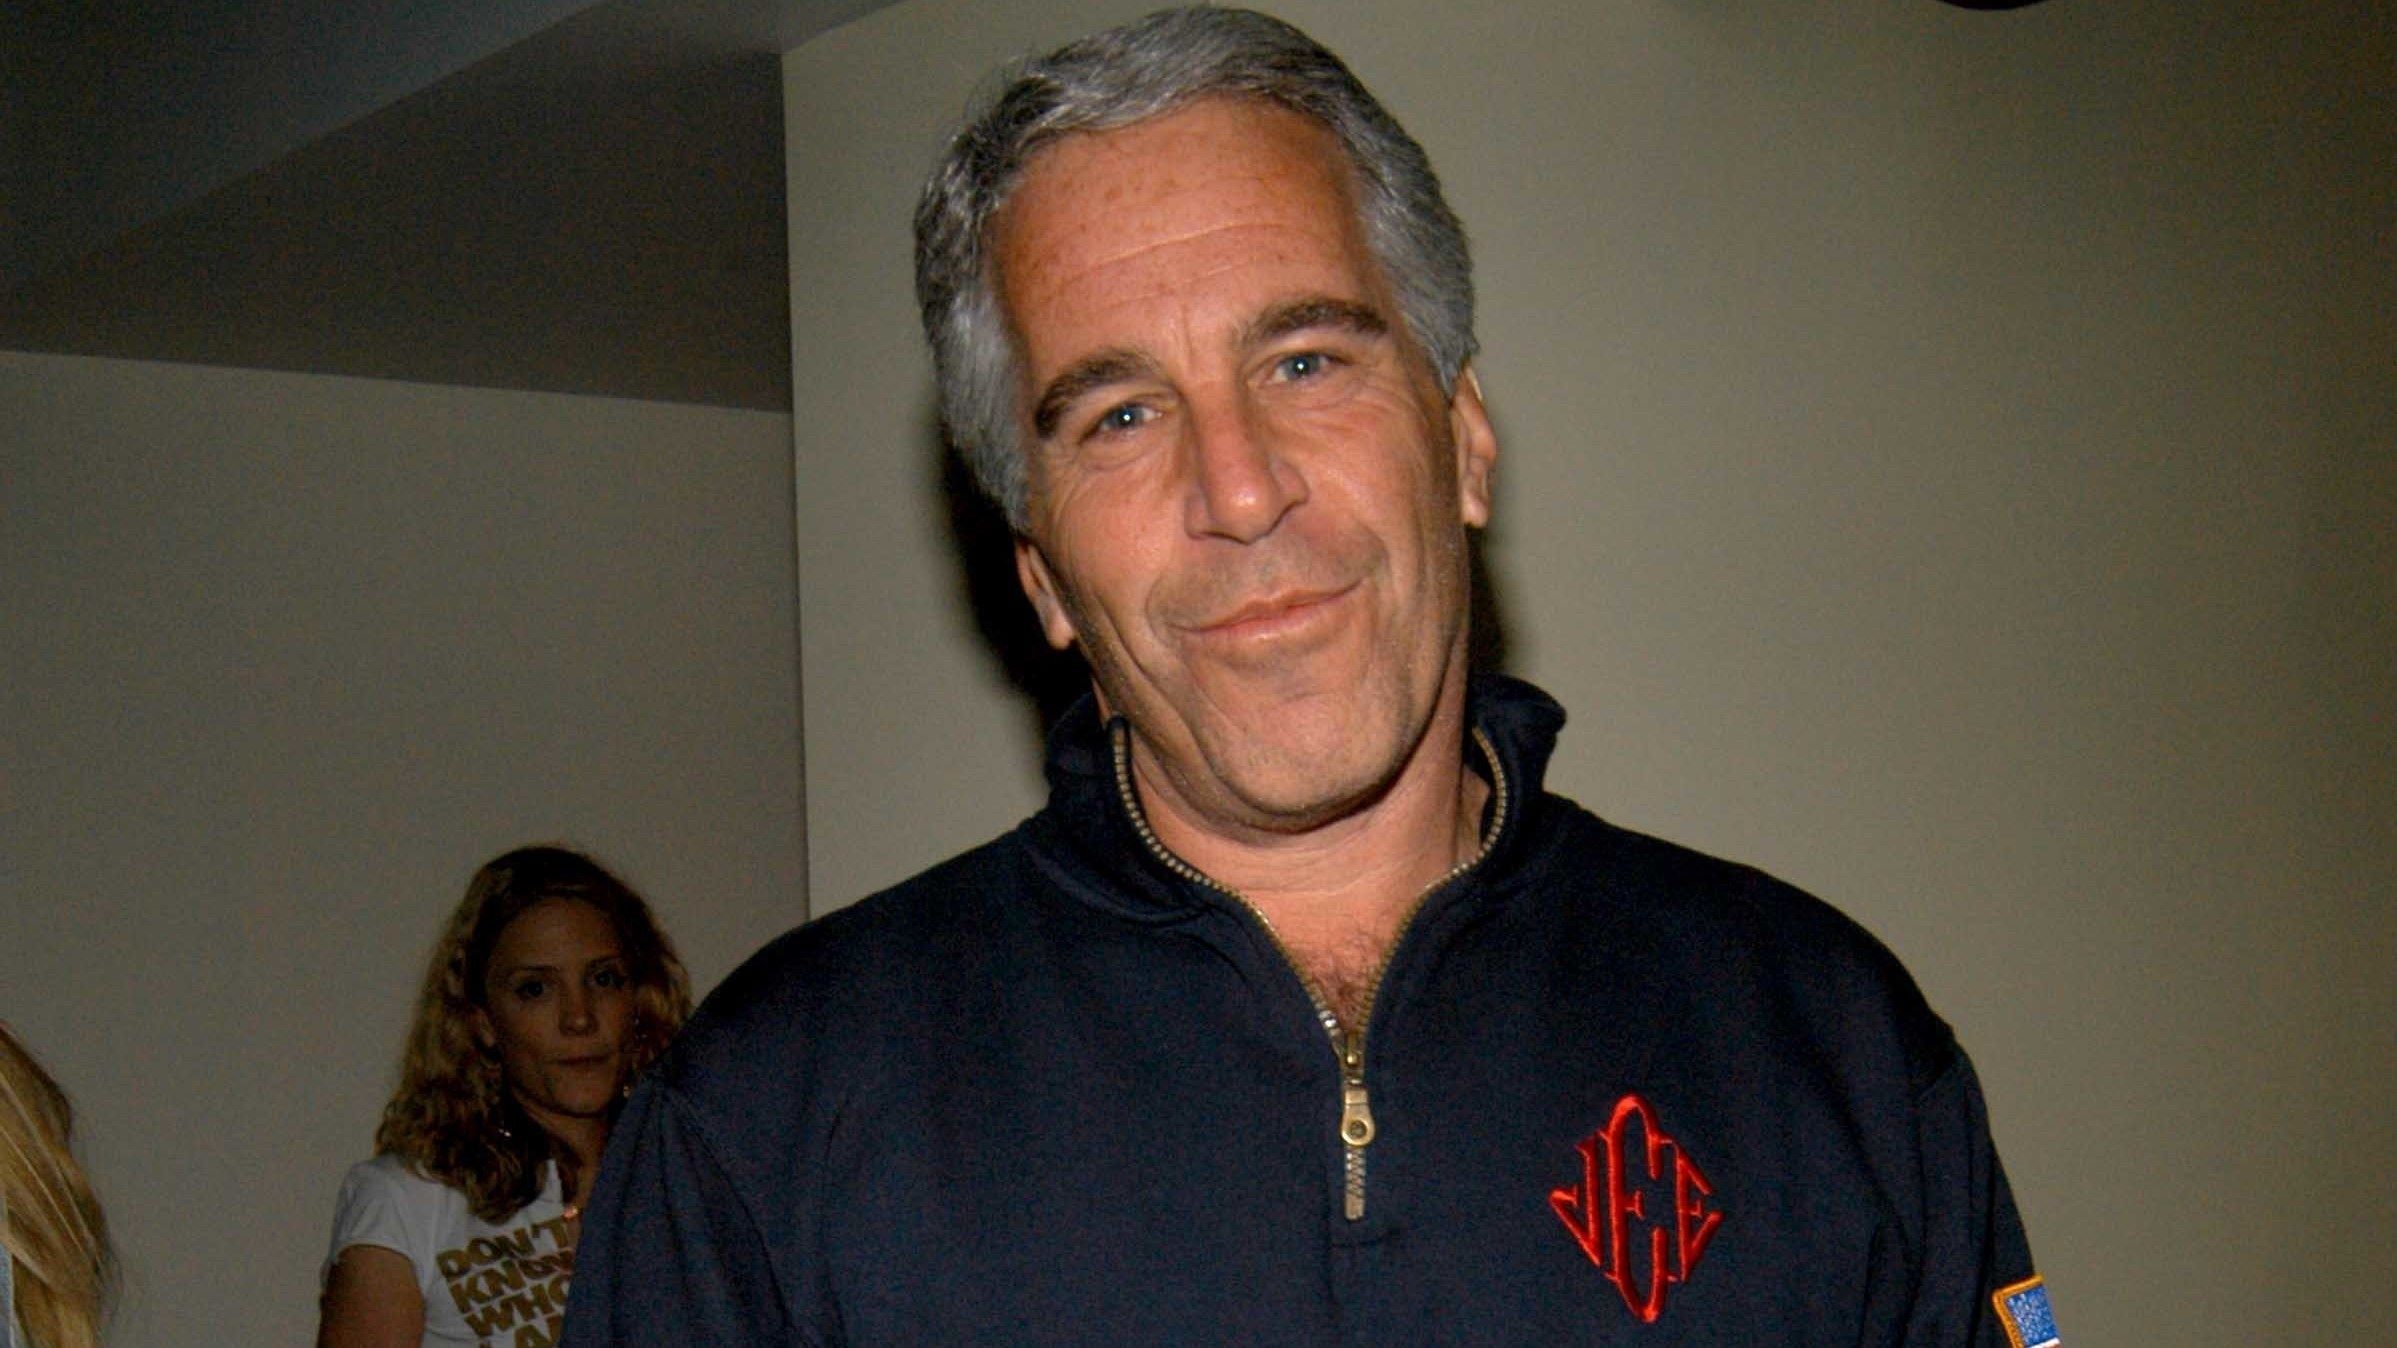 19-captivating-facts-about-jeffrey-epstein